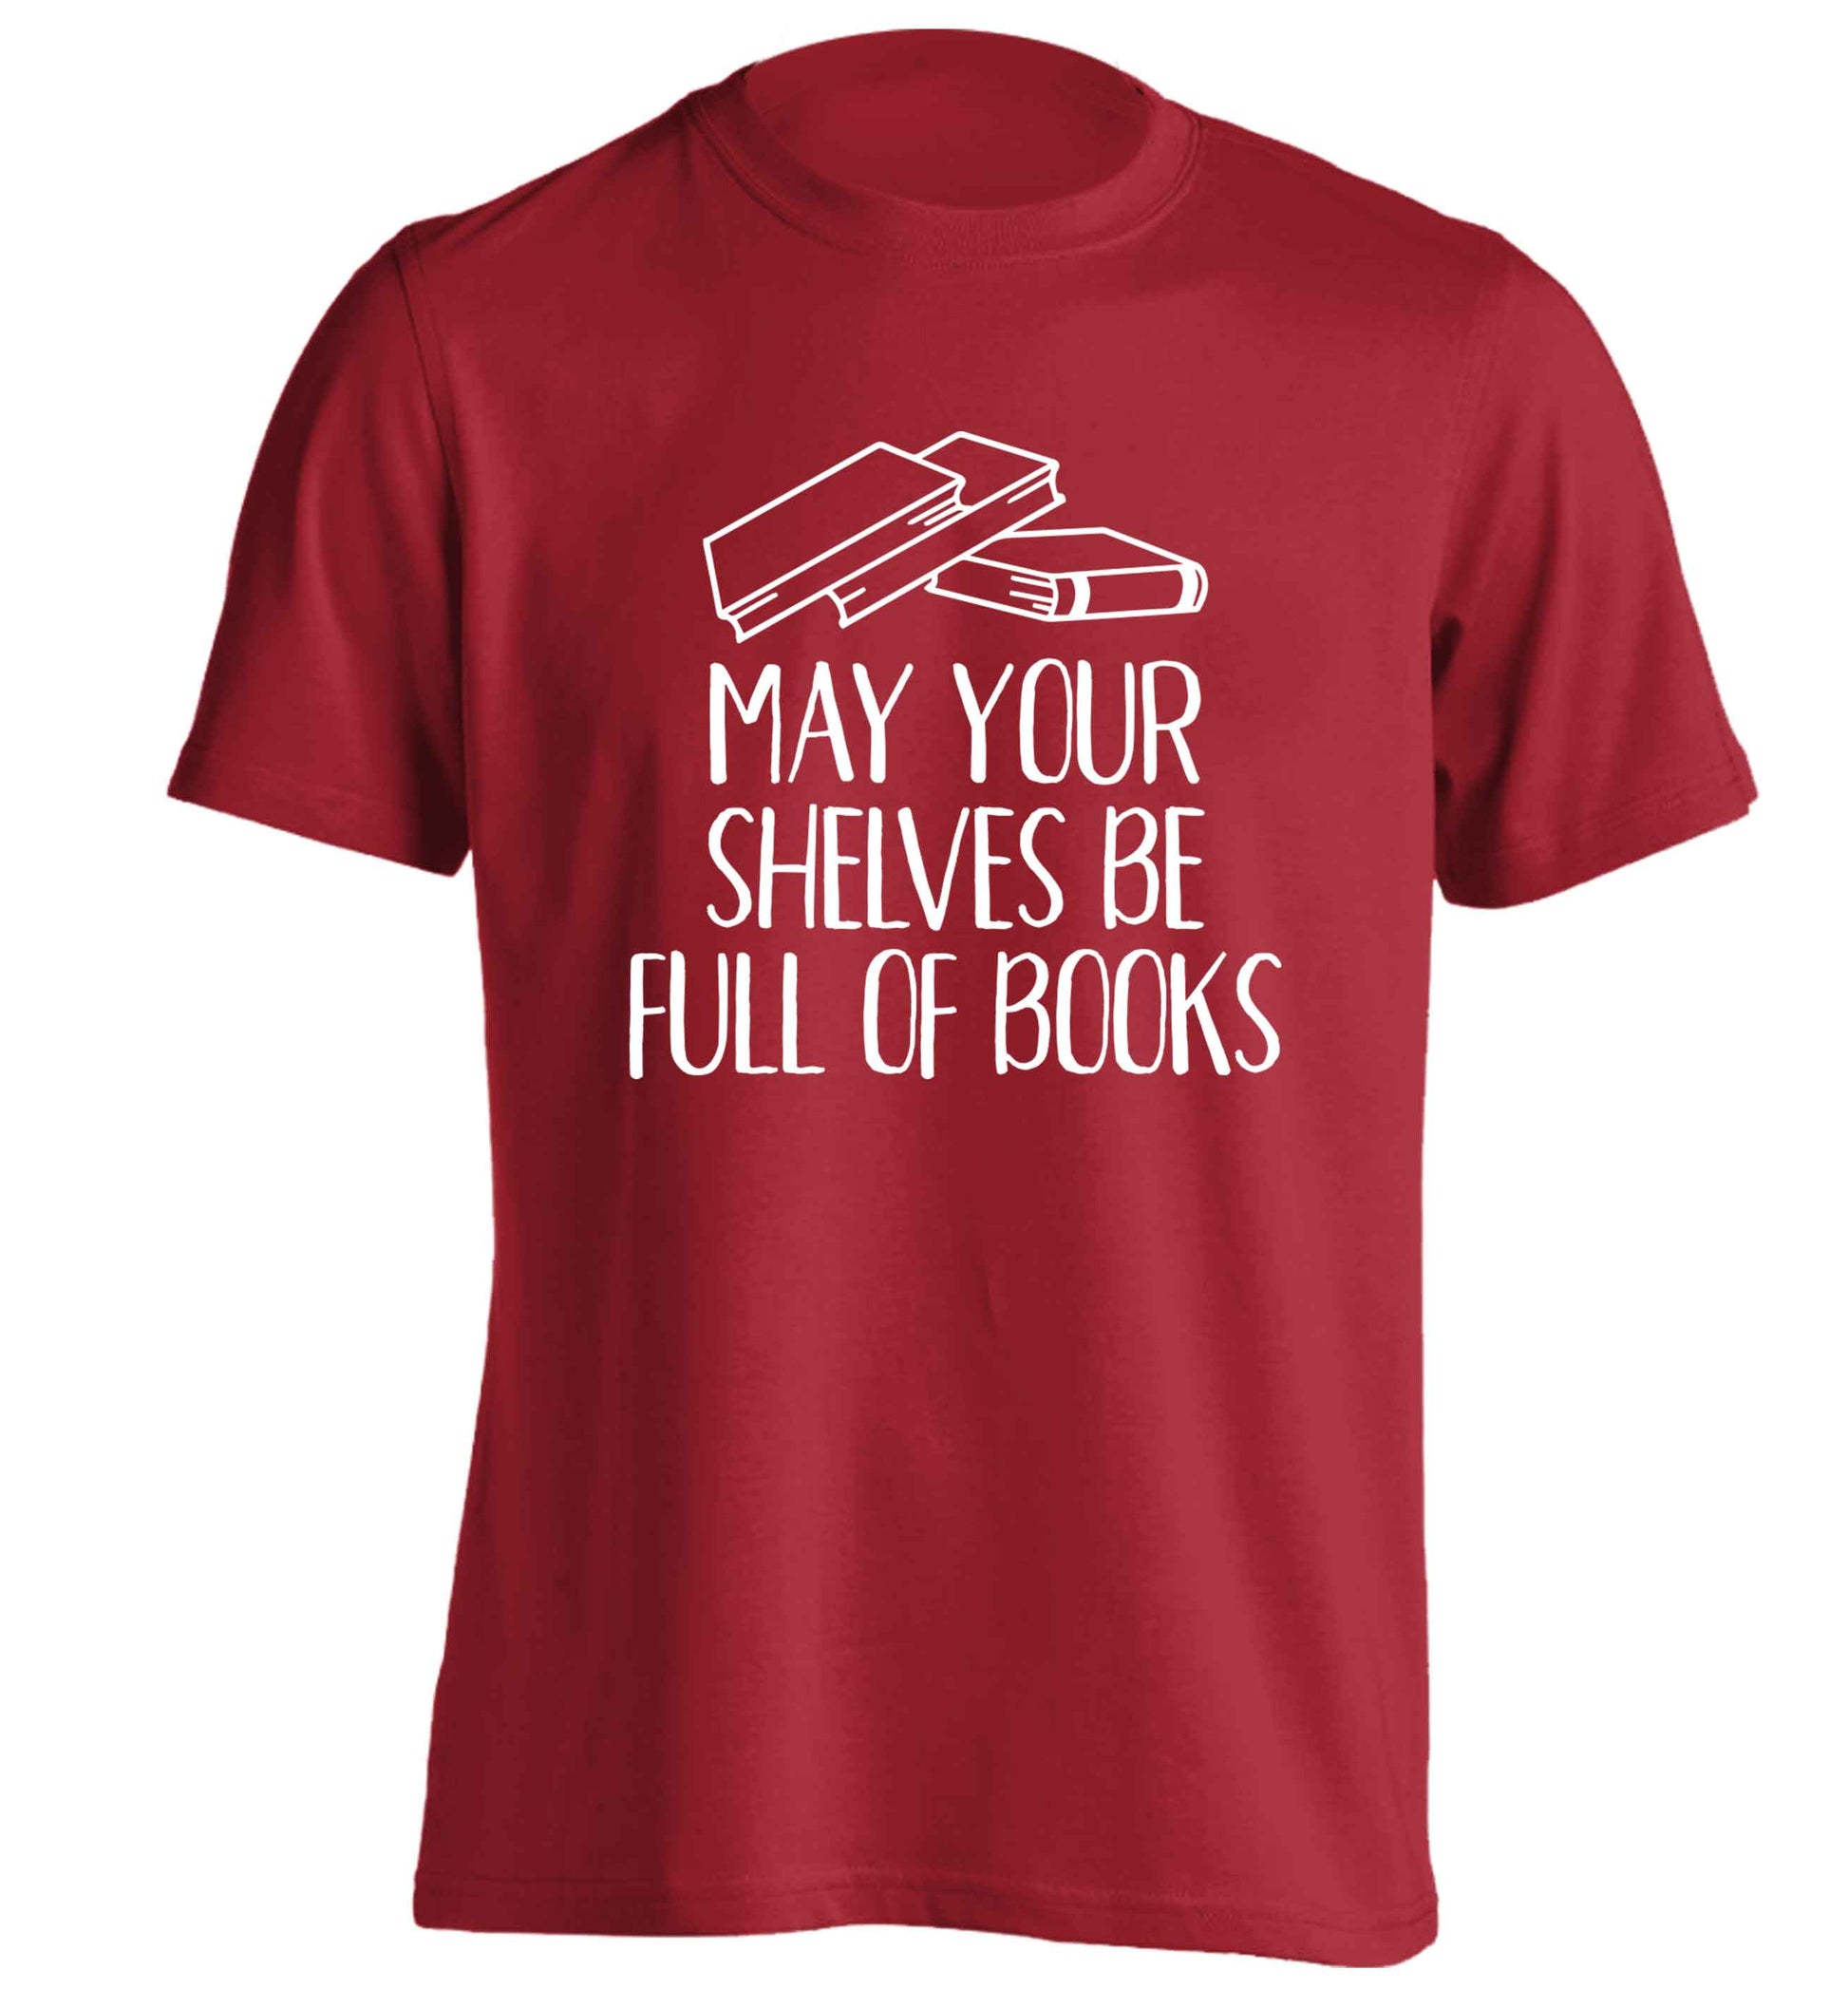 May your shelves be full of books adults unisex red Tshirt 2XL